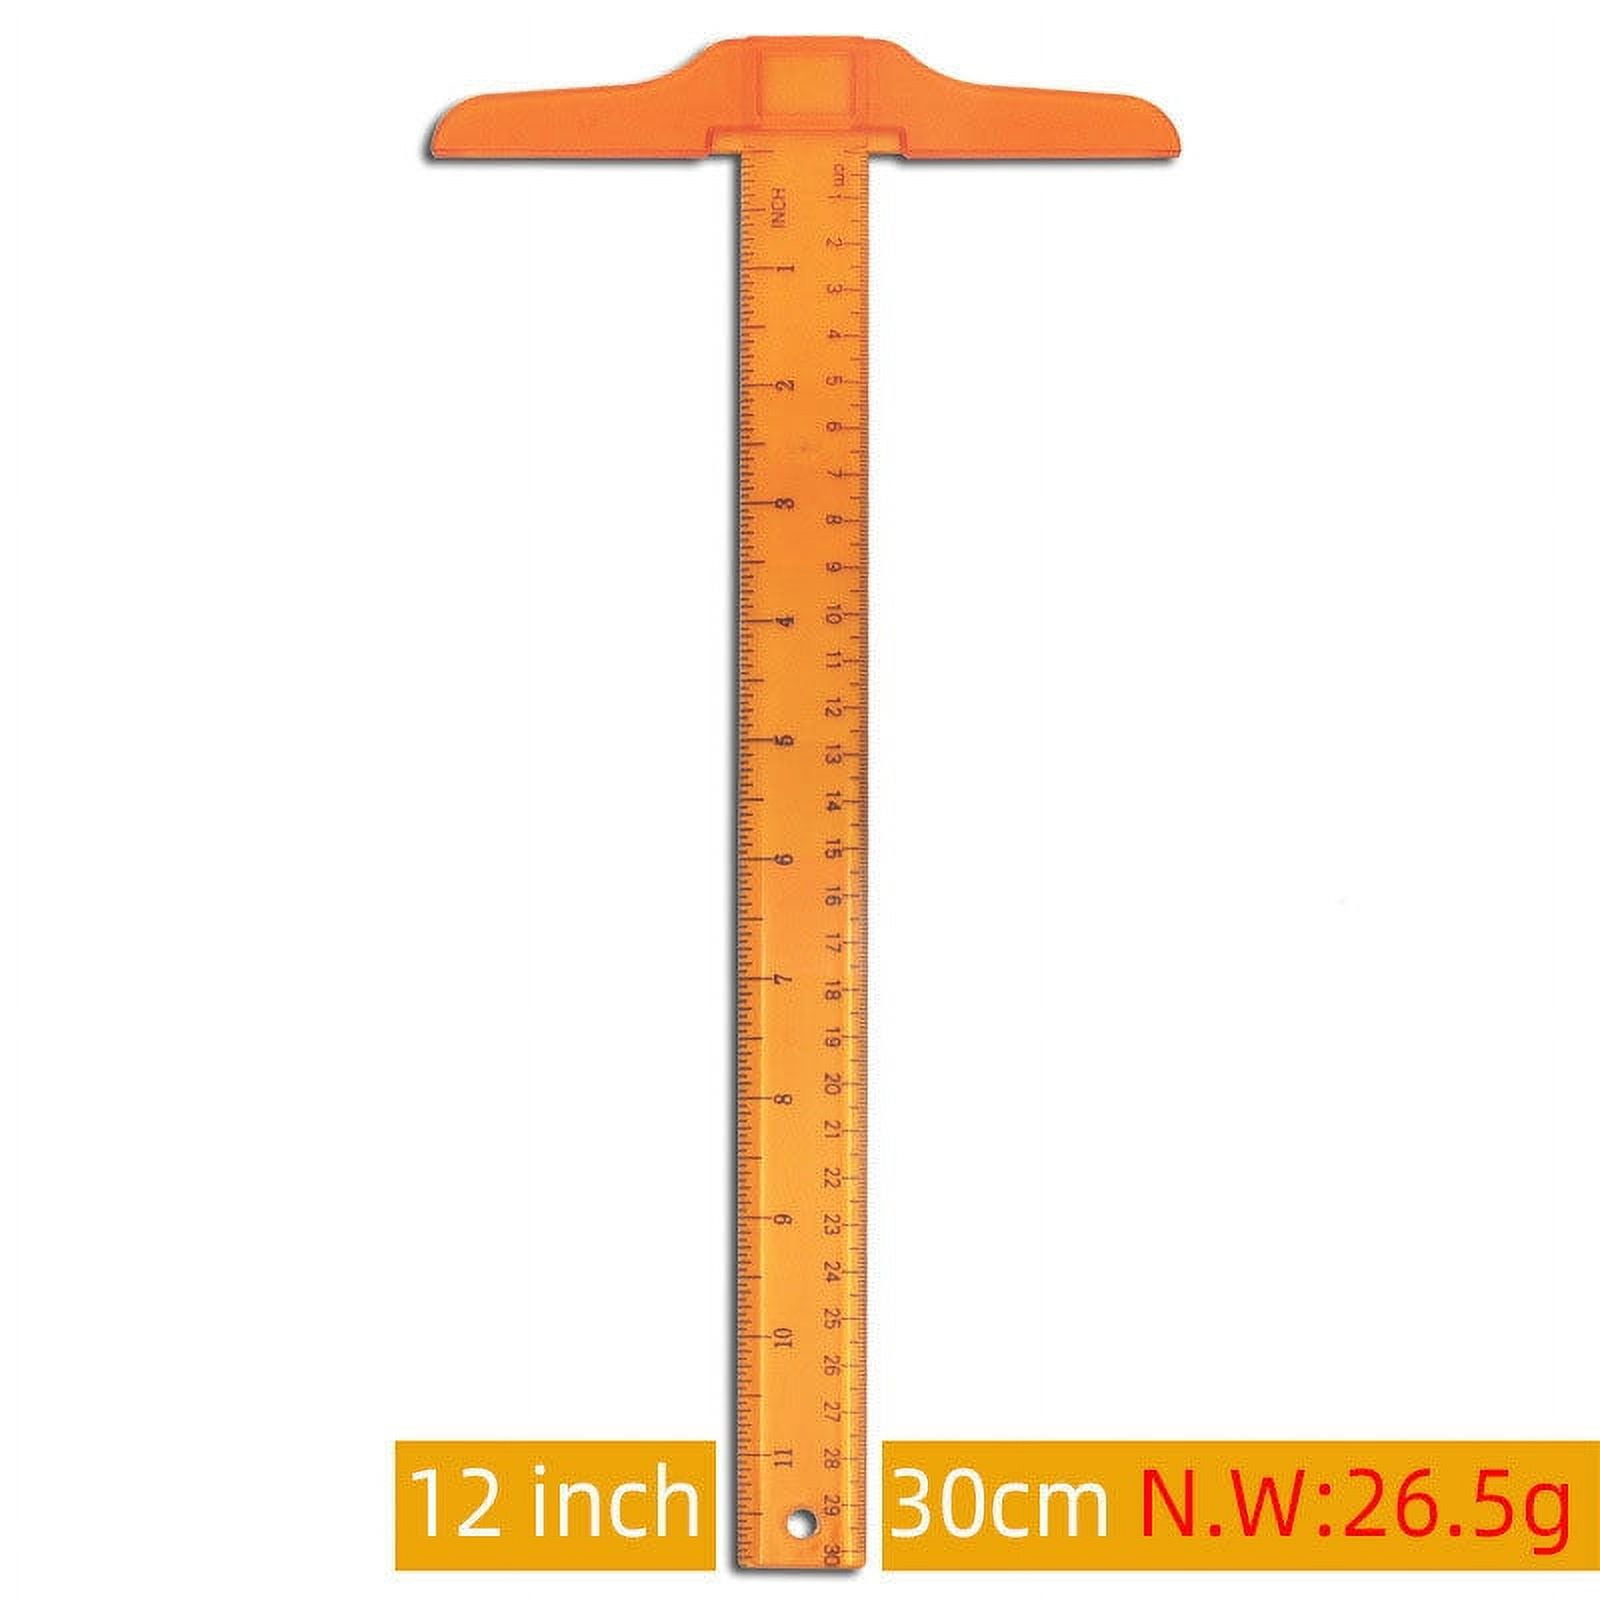 ORIONS GCT-30 Grande Square Cutting Ruler, 11.8 inches (30 cm)